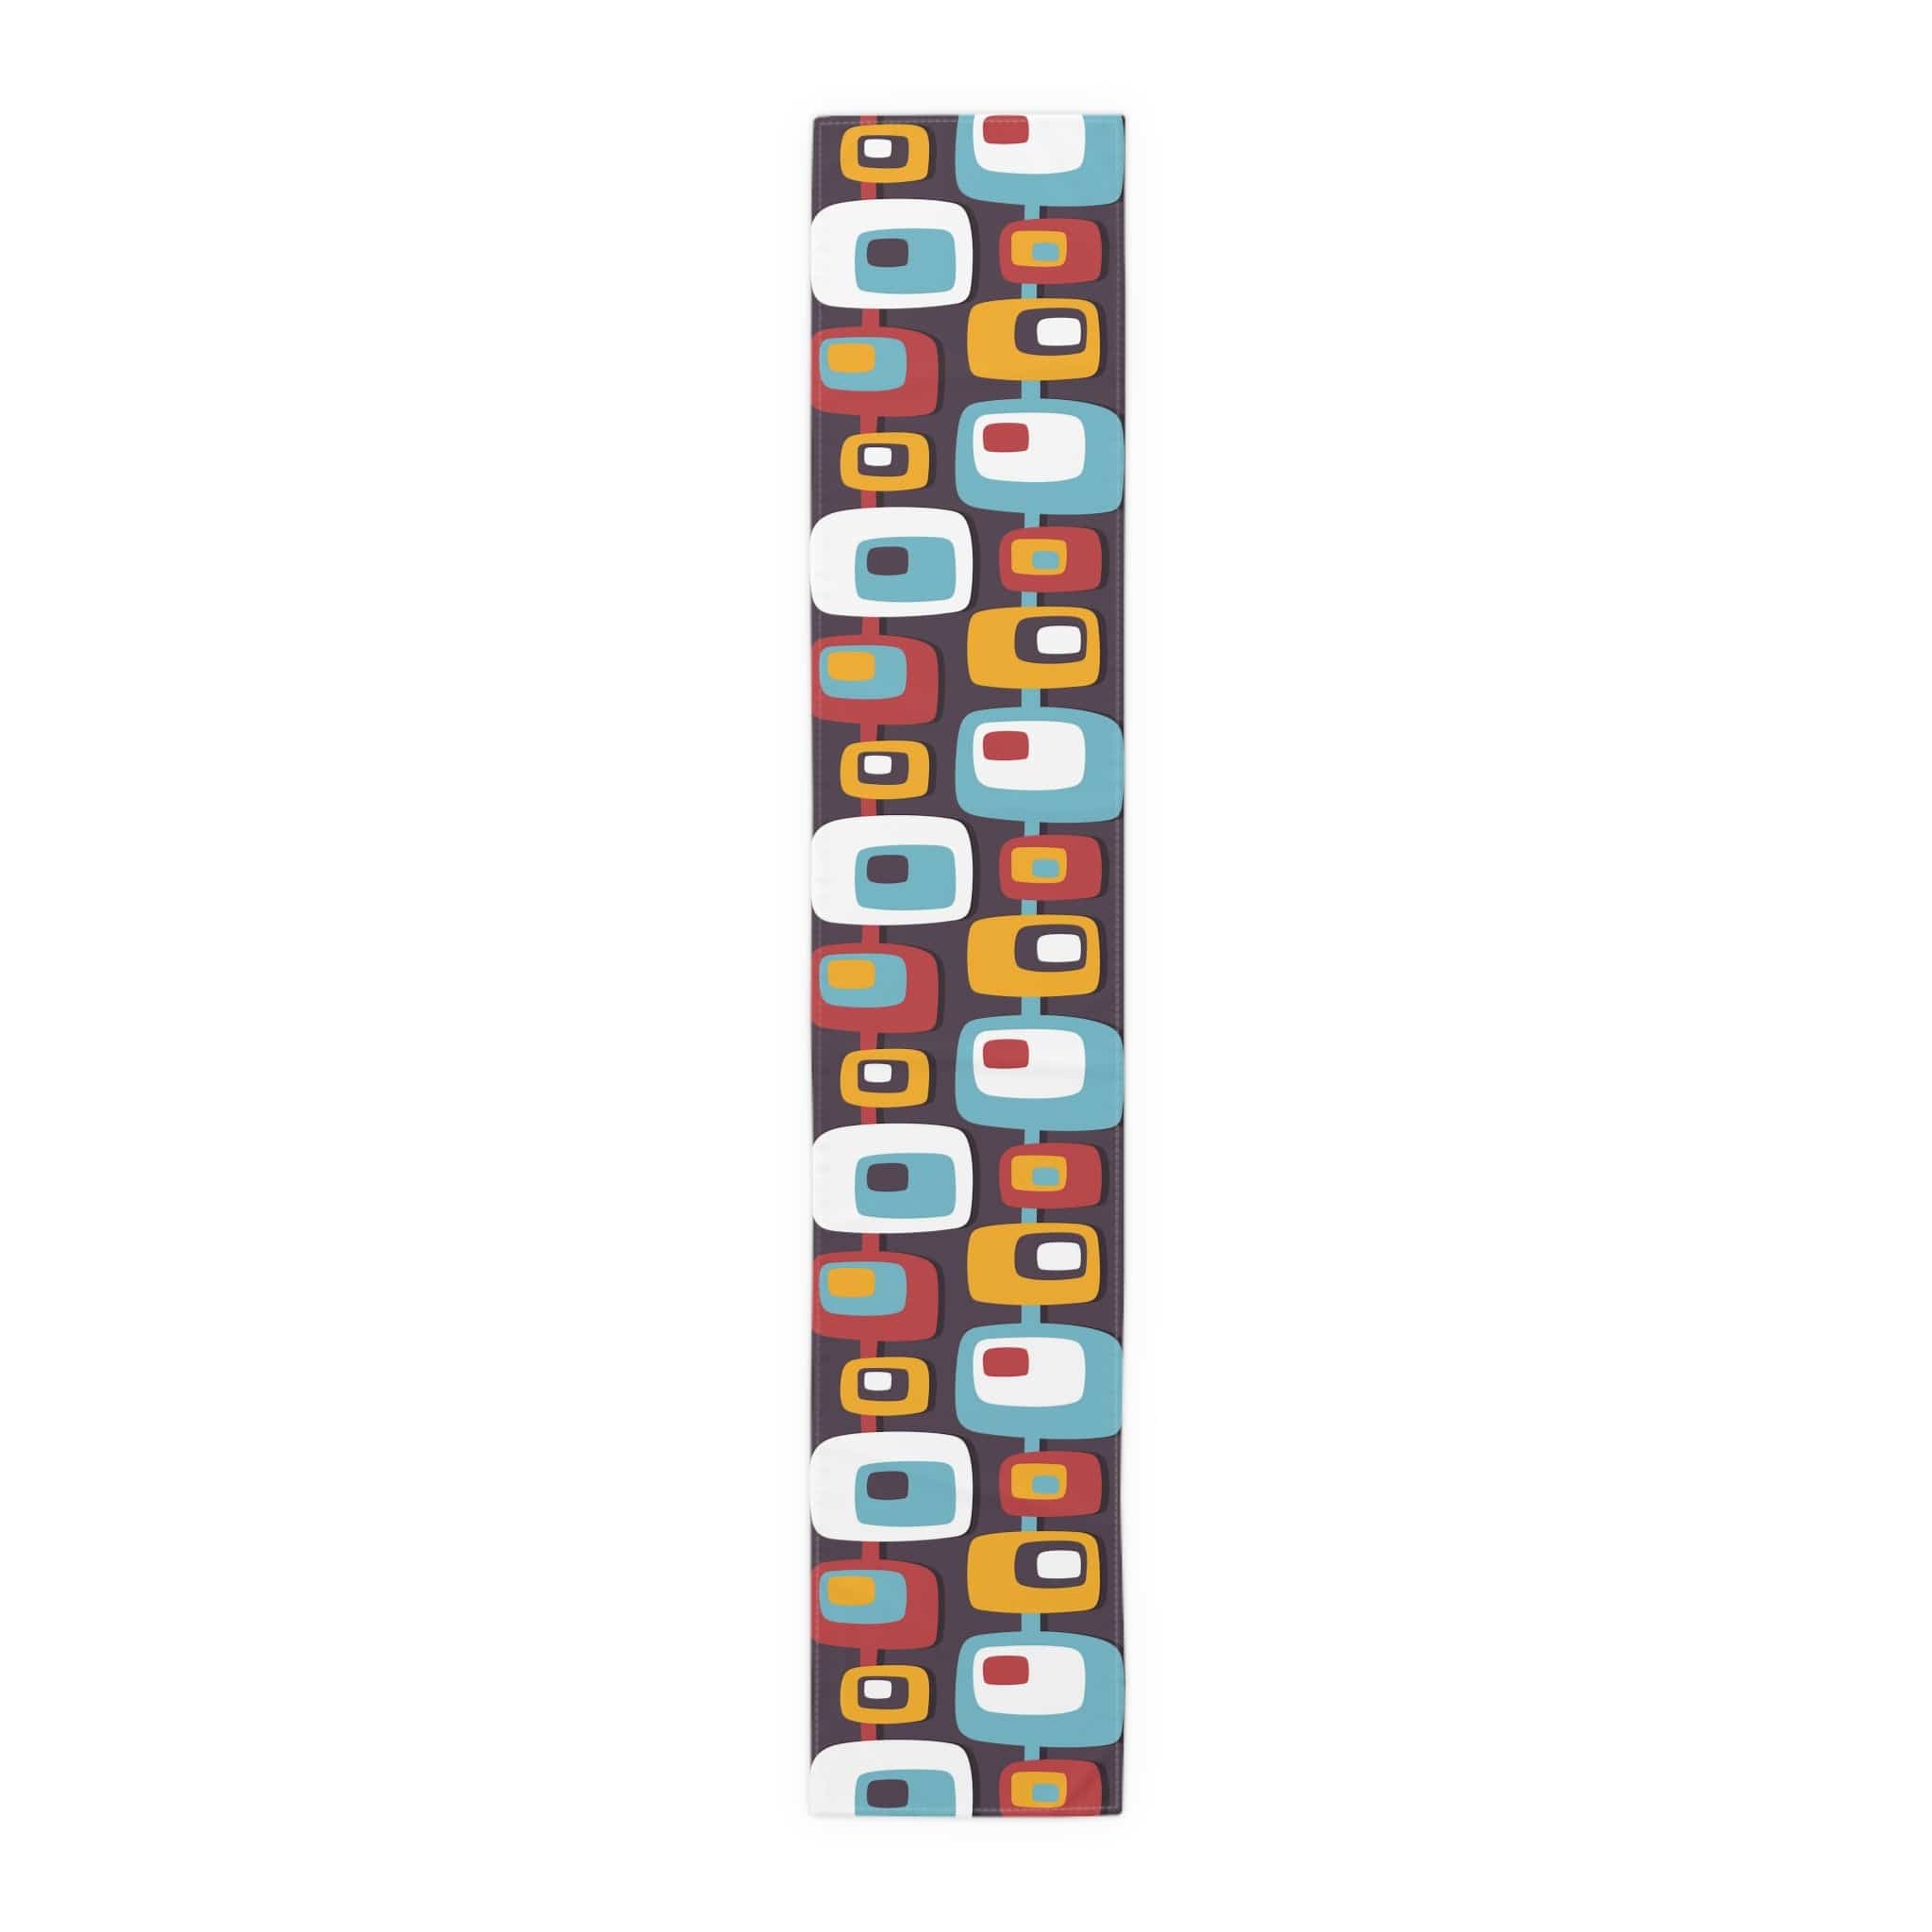 Kate McEnroe New York Mid Century Modern Geometric Abstract Squares Table Runner (Cotton, Poly)Table Runners19011059915990492799